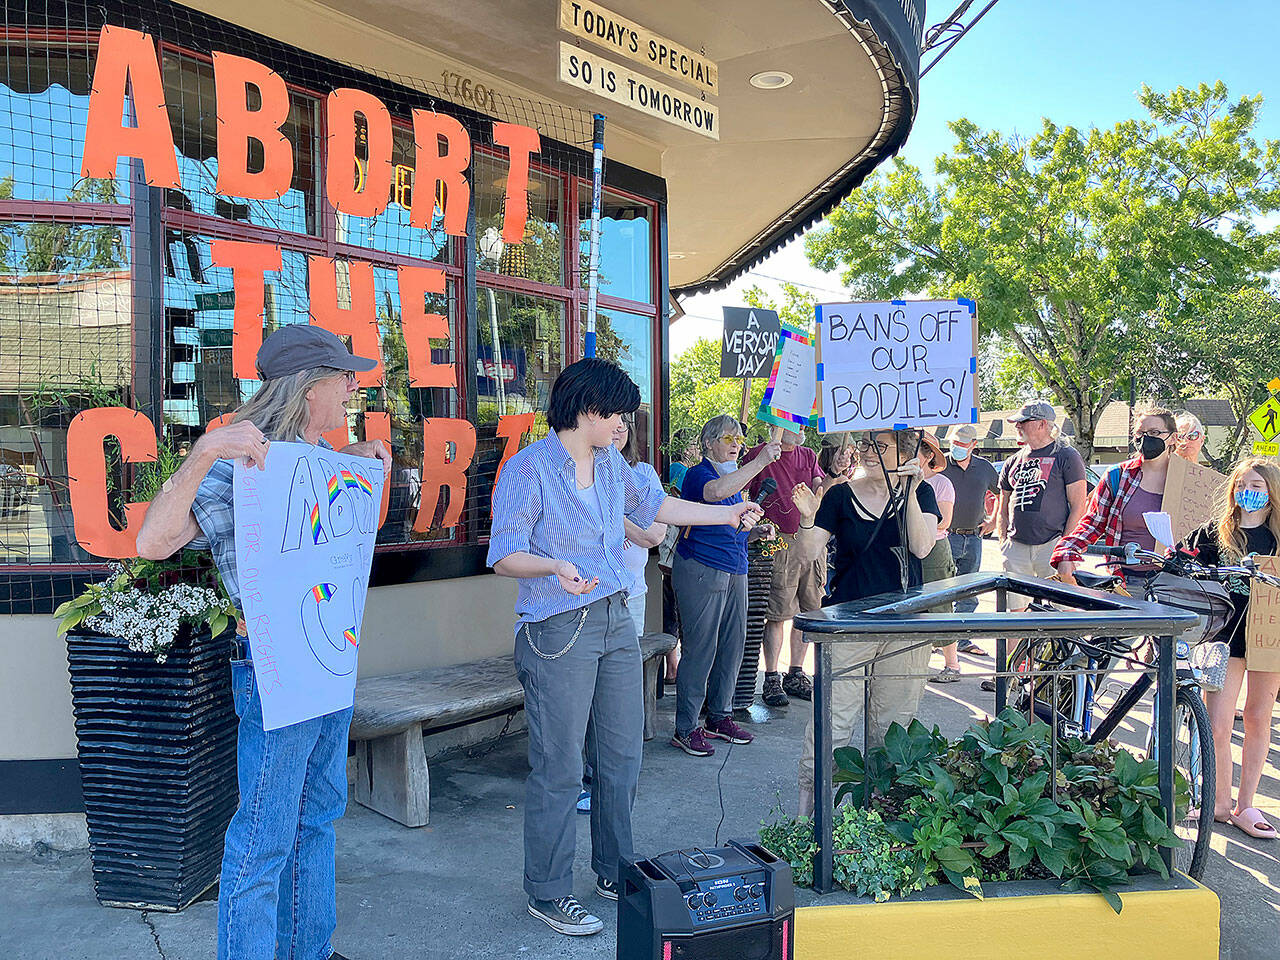 Islander Max Rulff hands the microphone back to Suzanne Greenberg, a member of Indivisible Vashon, after speaking to those who gathered on Friday to protest the U.S. Supreme Court’s decision to overturn Roe v. Wade. (Elizabeth Shepherd Photo)